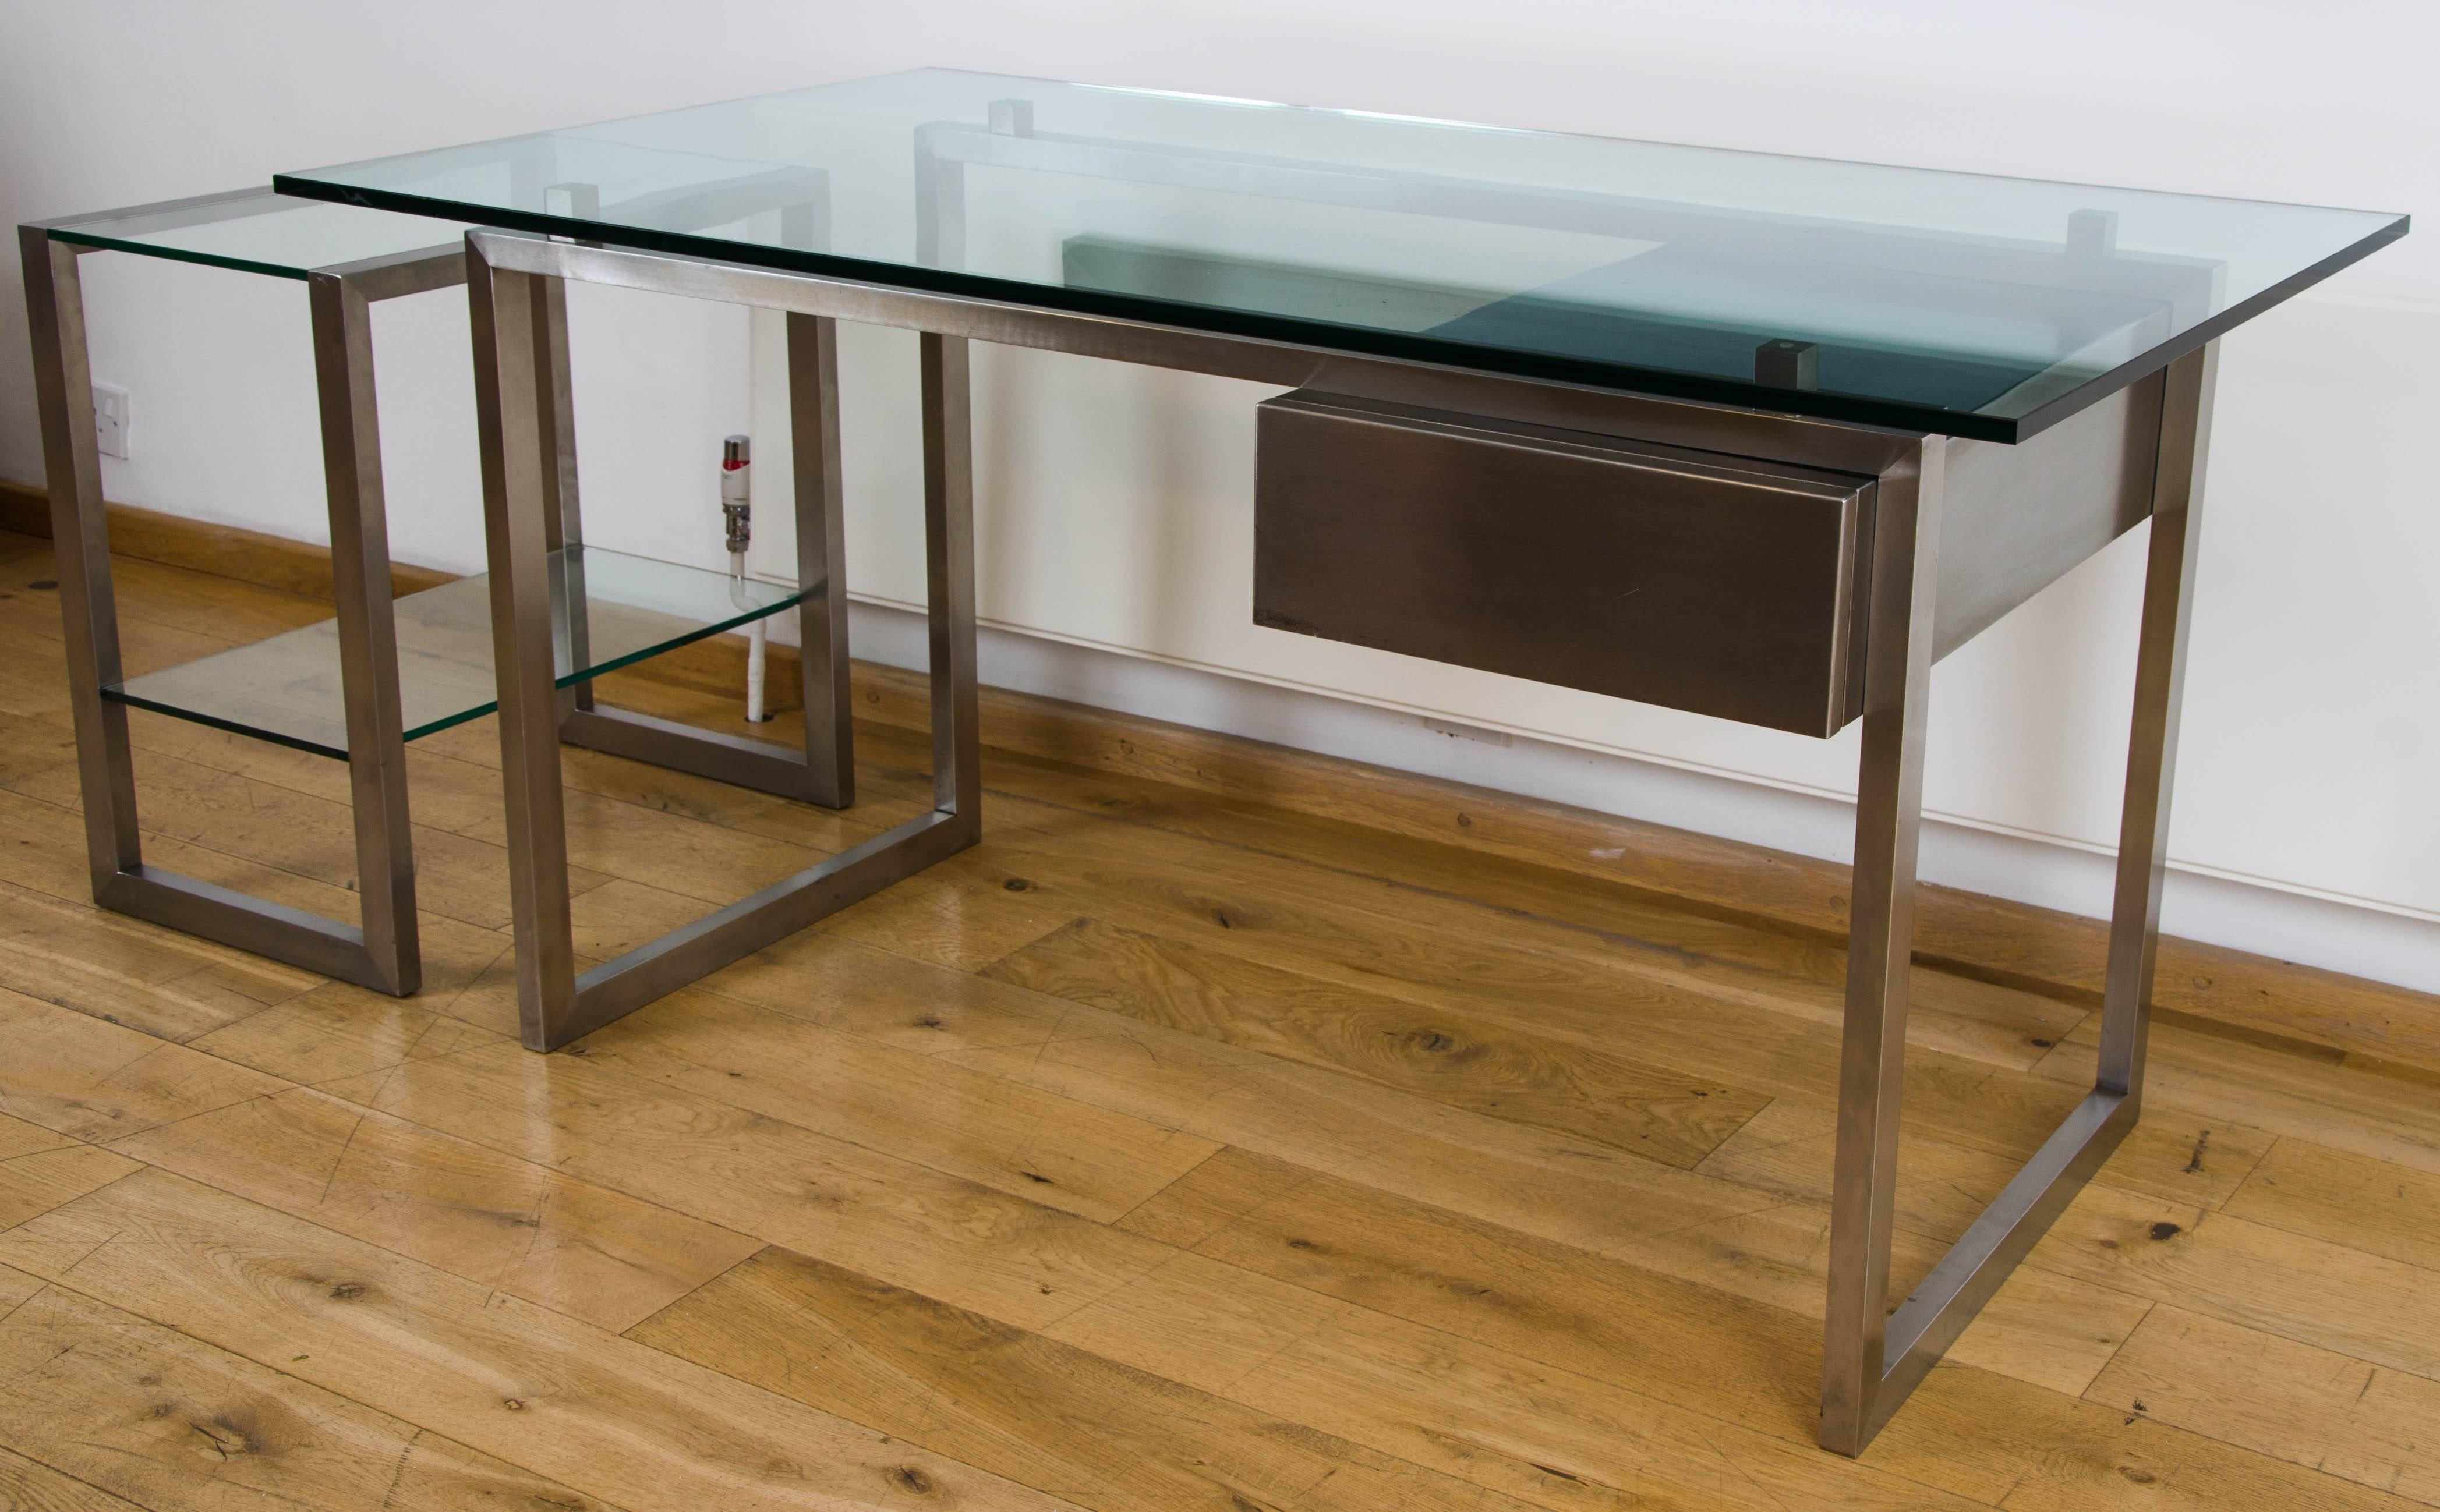 Attributed to Paul Legeard
Stylish 1970s brushed stainless steel desk with single right hand drawer,
with separate companion shelving unit. Measures: H 63.5cm x W 40cm x D 60cm.